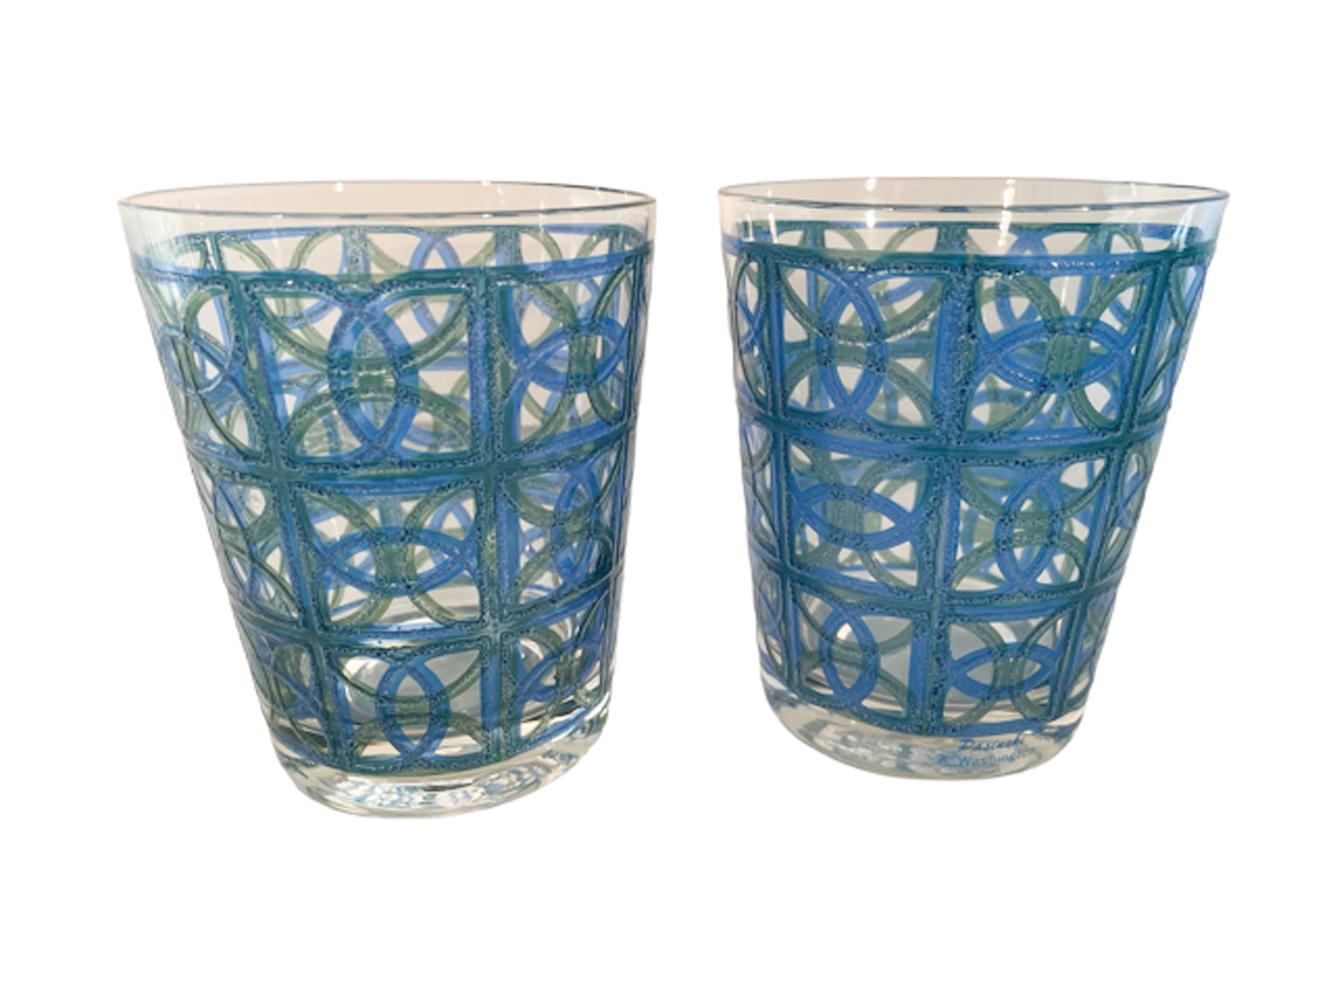 Set of four Mid-Century Modern double old fashioned glasses designed by Irene Pasinski for Washington Glass Co. in clear glass with raised and textured translucent green and blue overlapped circles and squares, creating a complex geometric pattern.